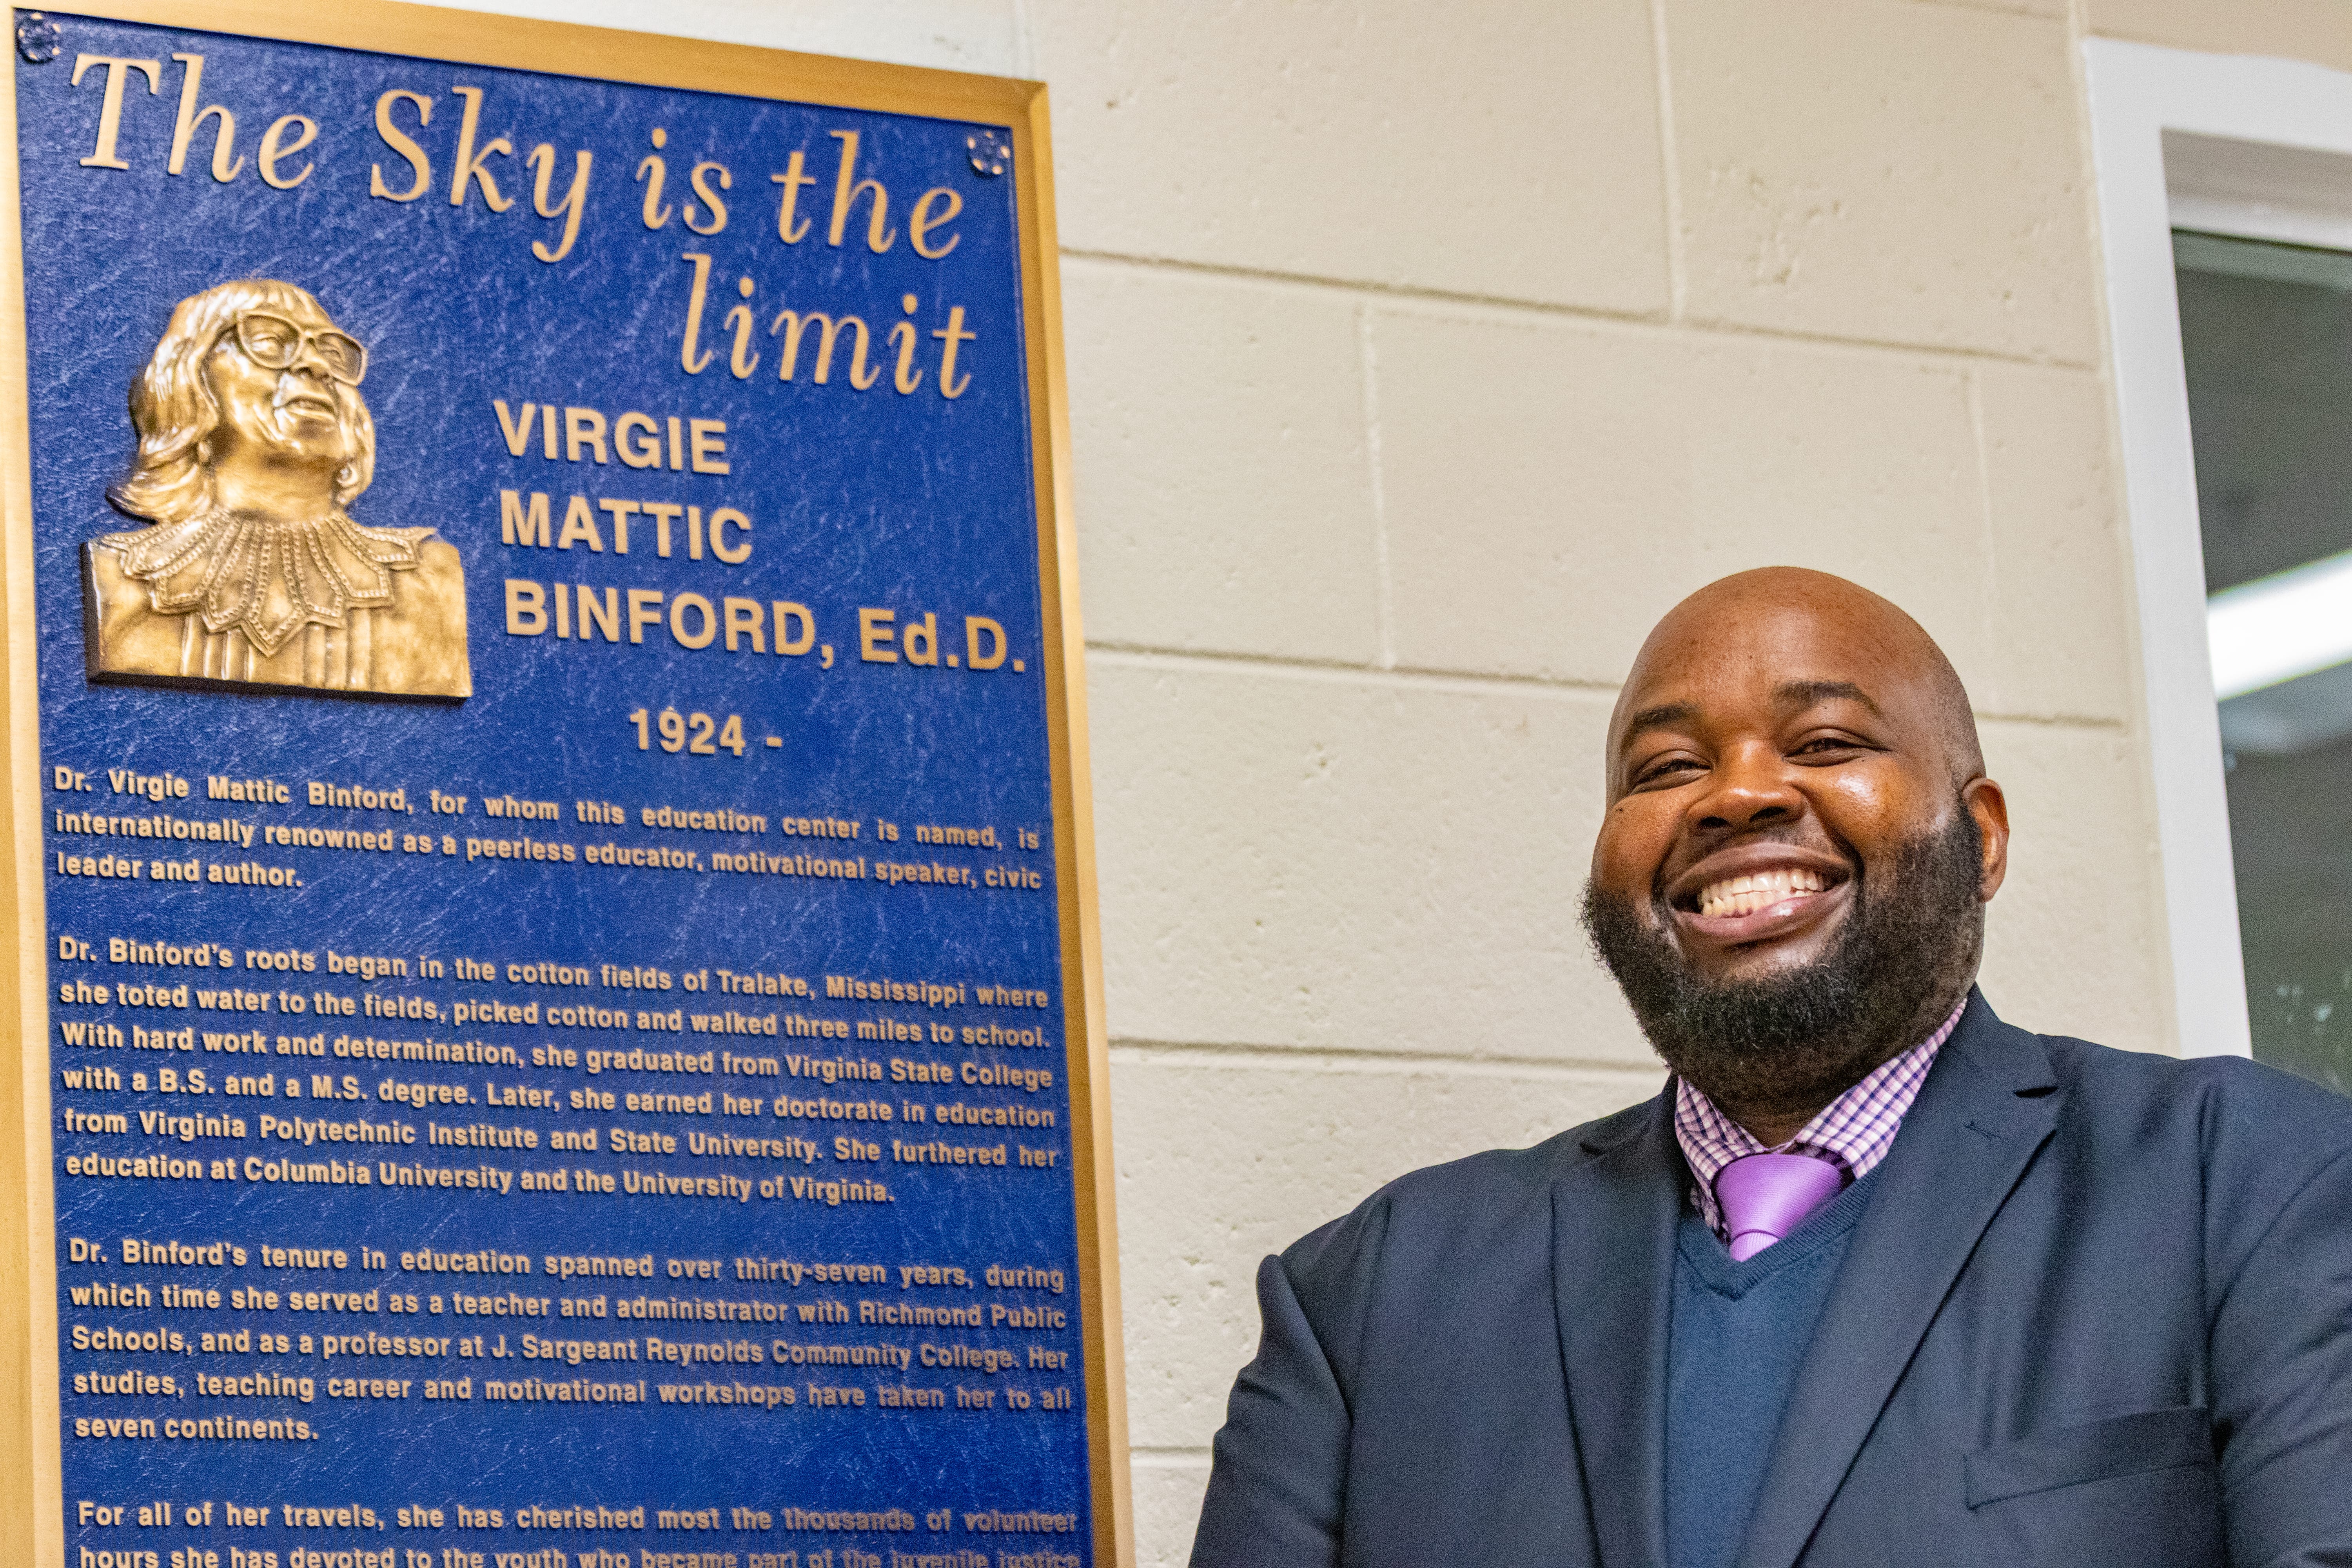 Rodney Robinson stands beside a sign that details the biography of Virgie Binford, Ed.D., for whom the education center where he teaches is named.